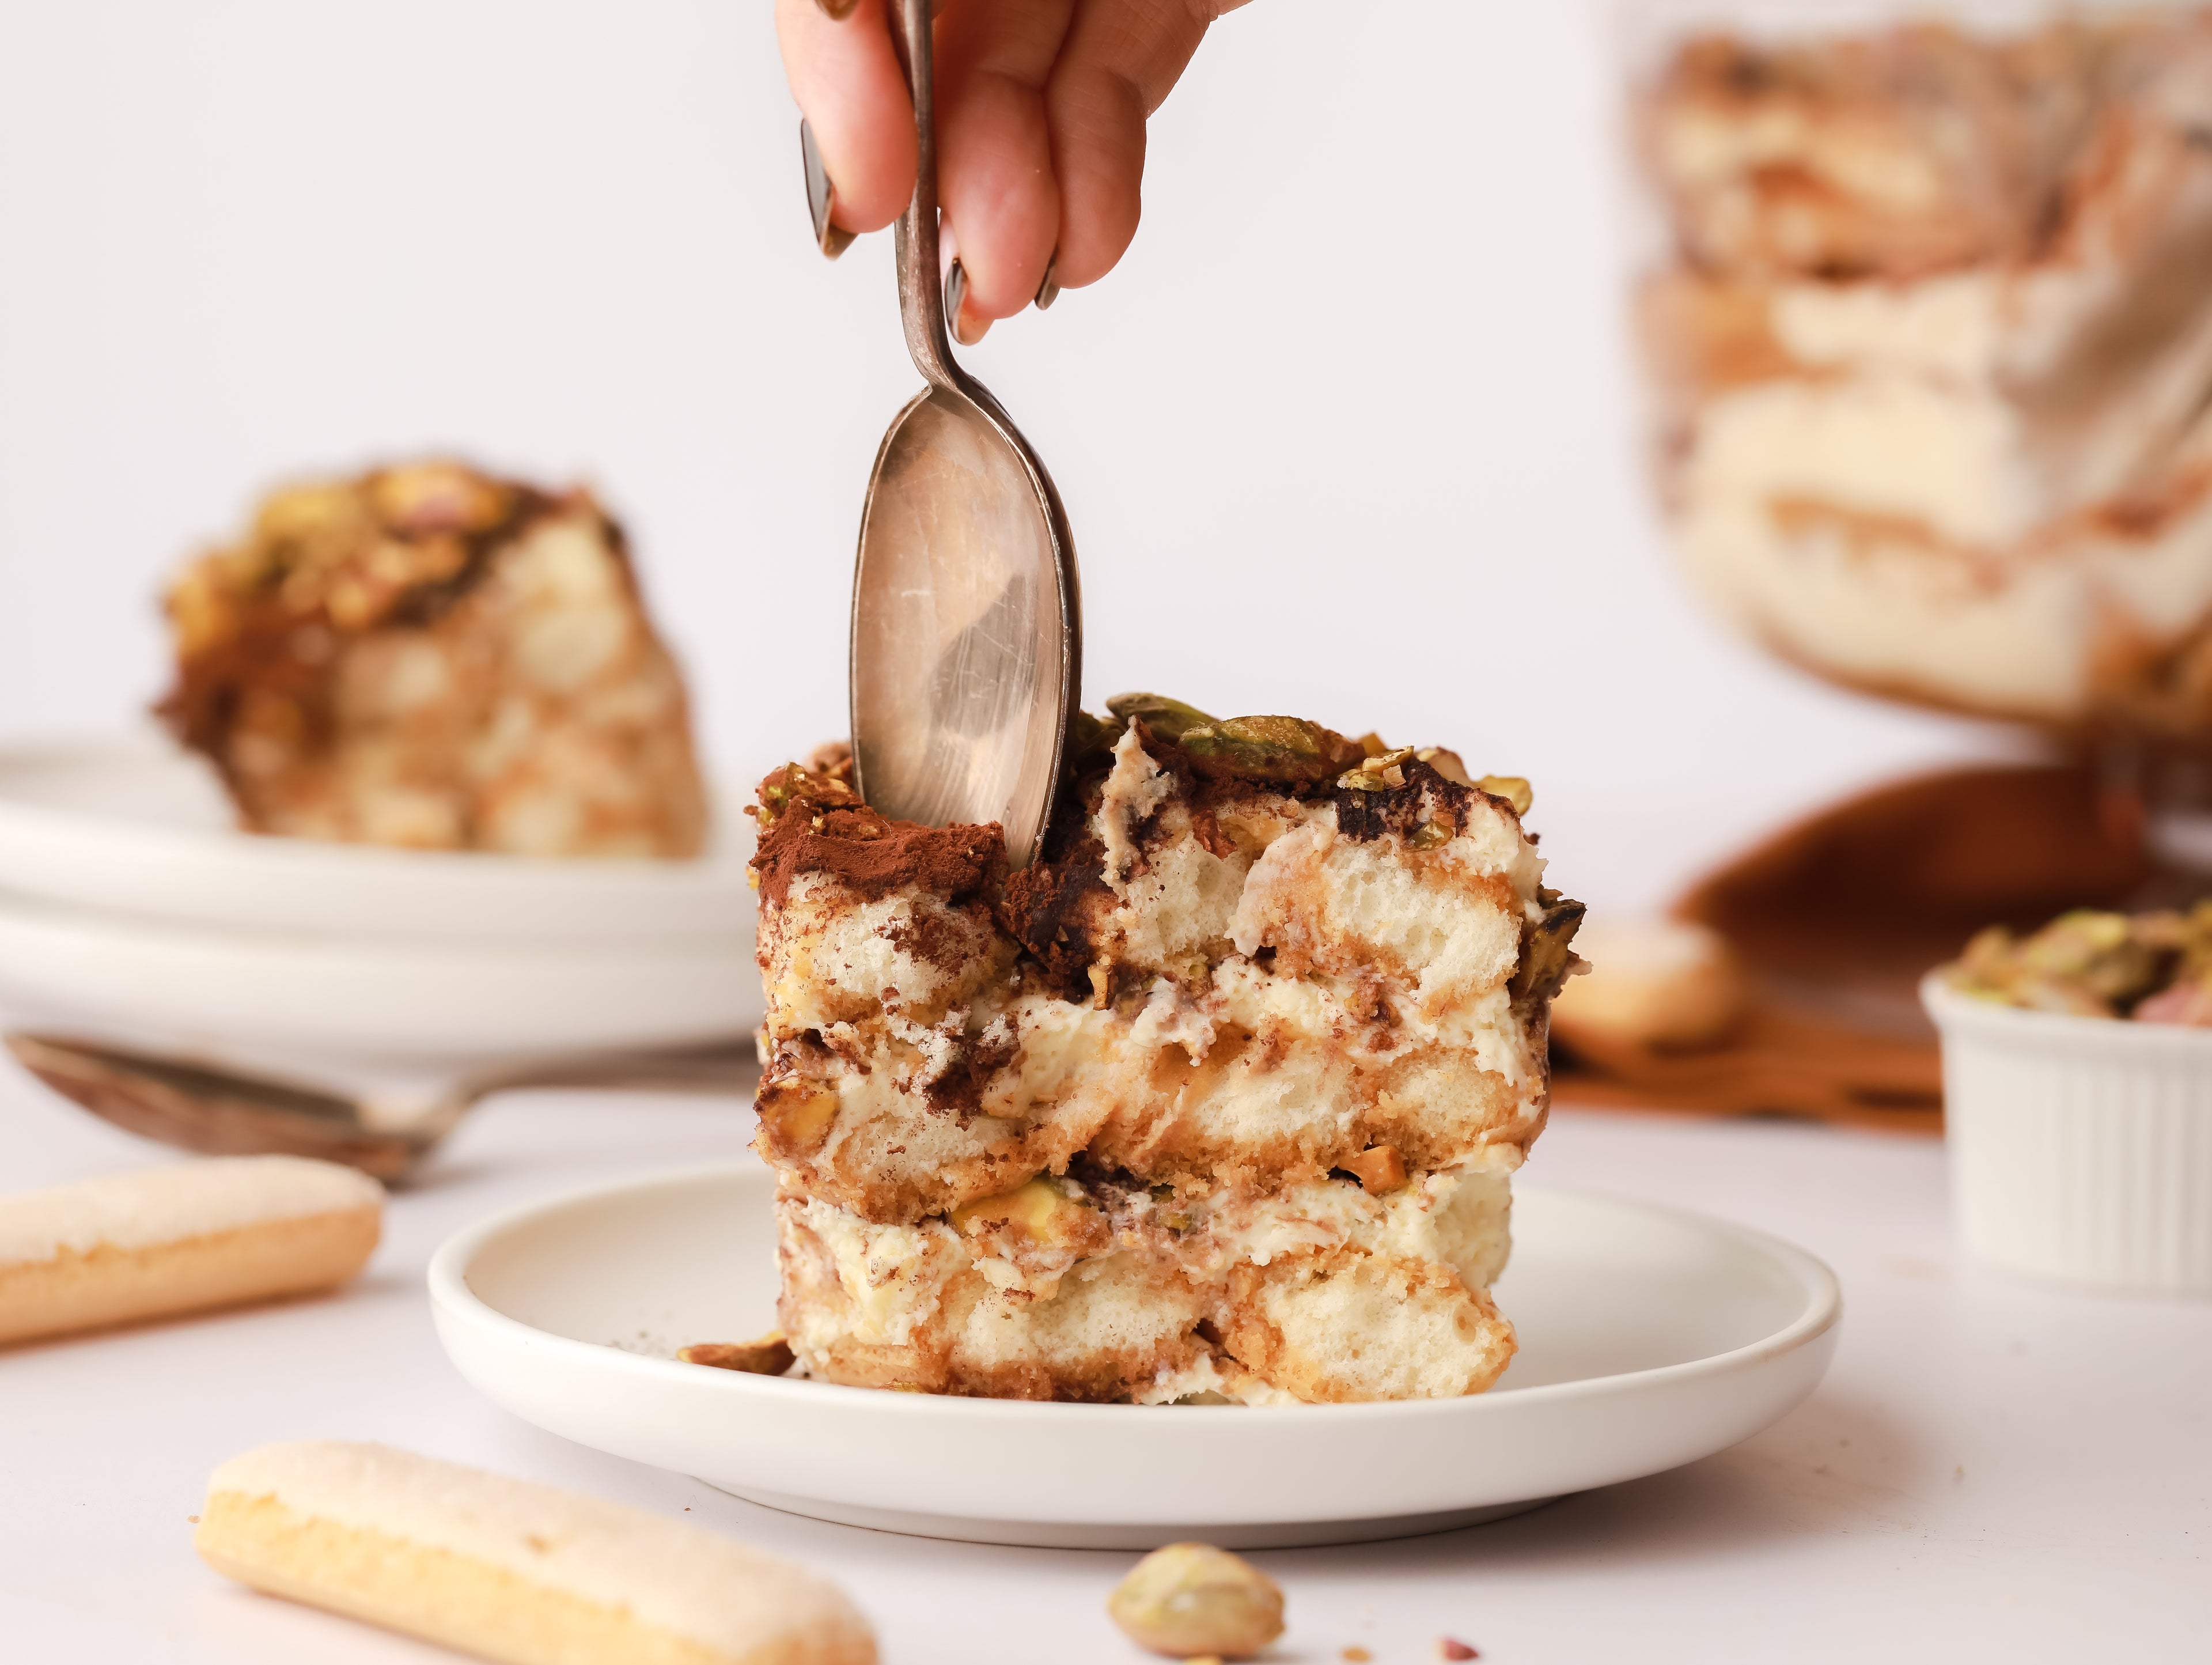 Slice of tiramisu on plate with a spoon scooping out a bite